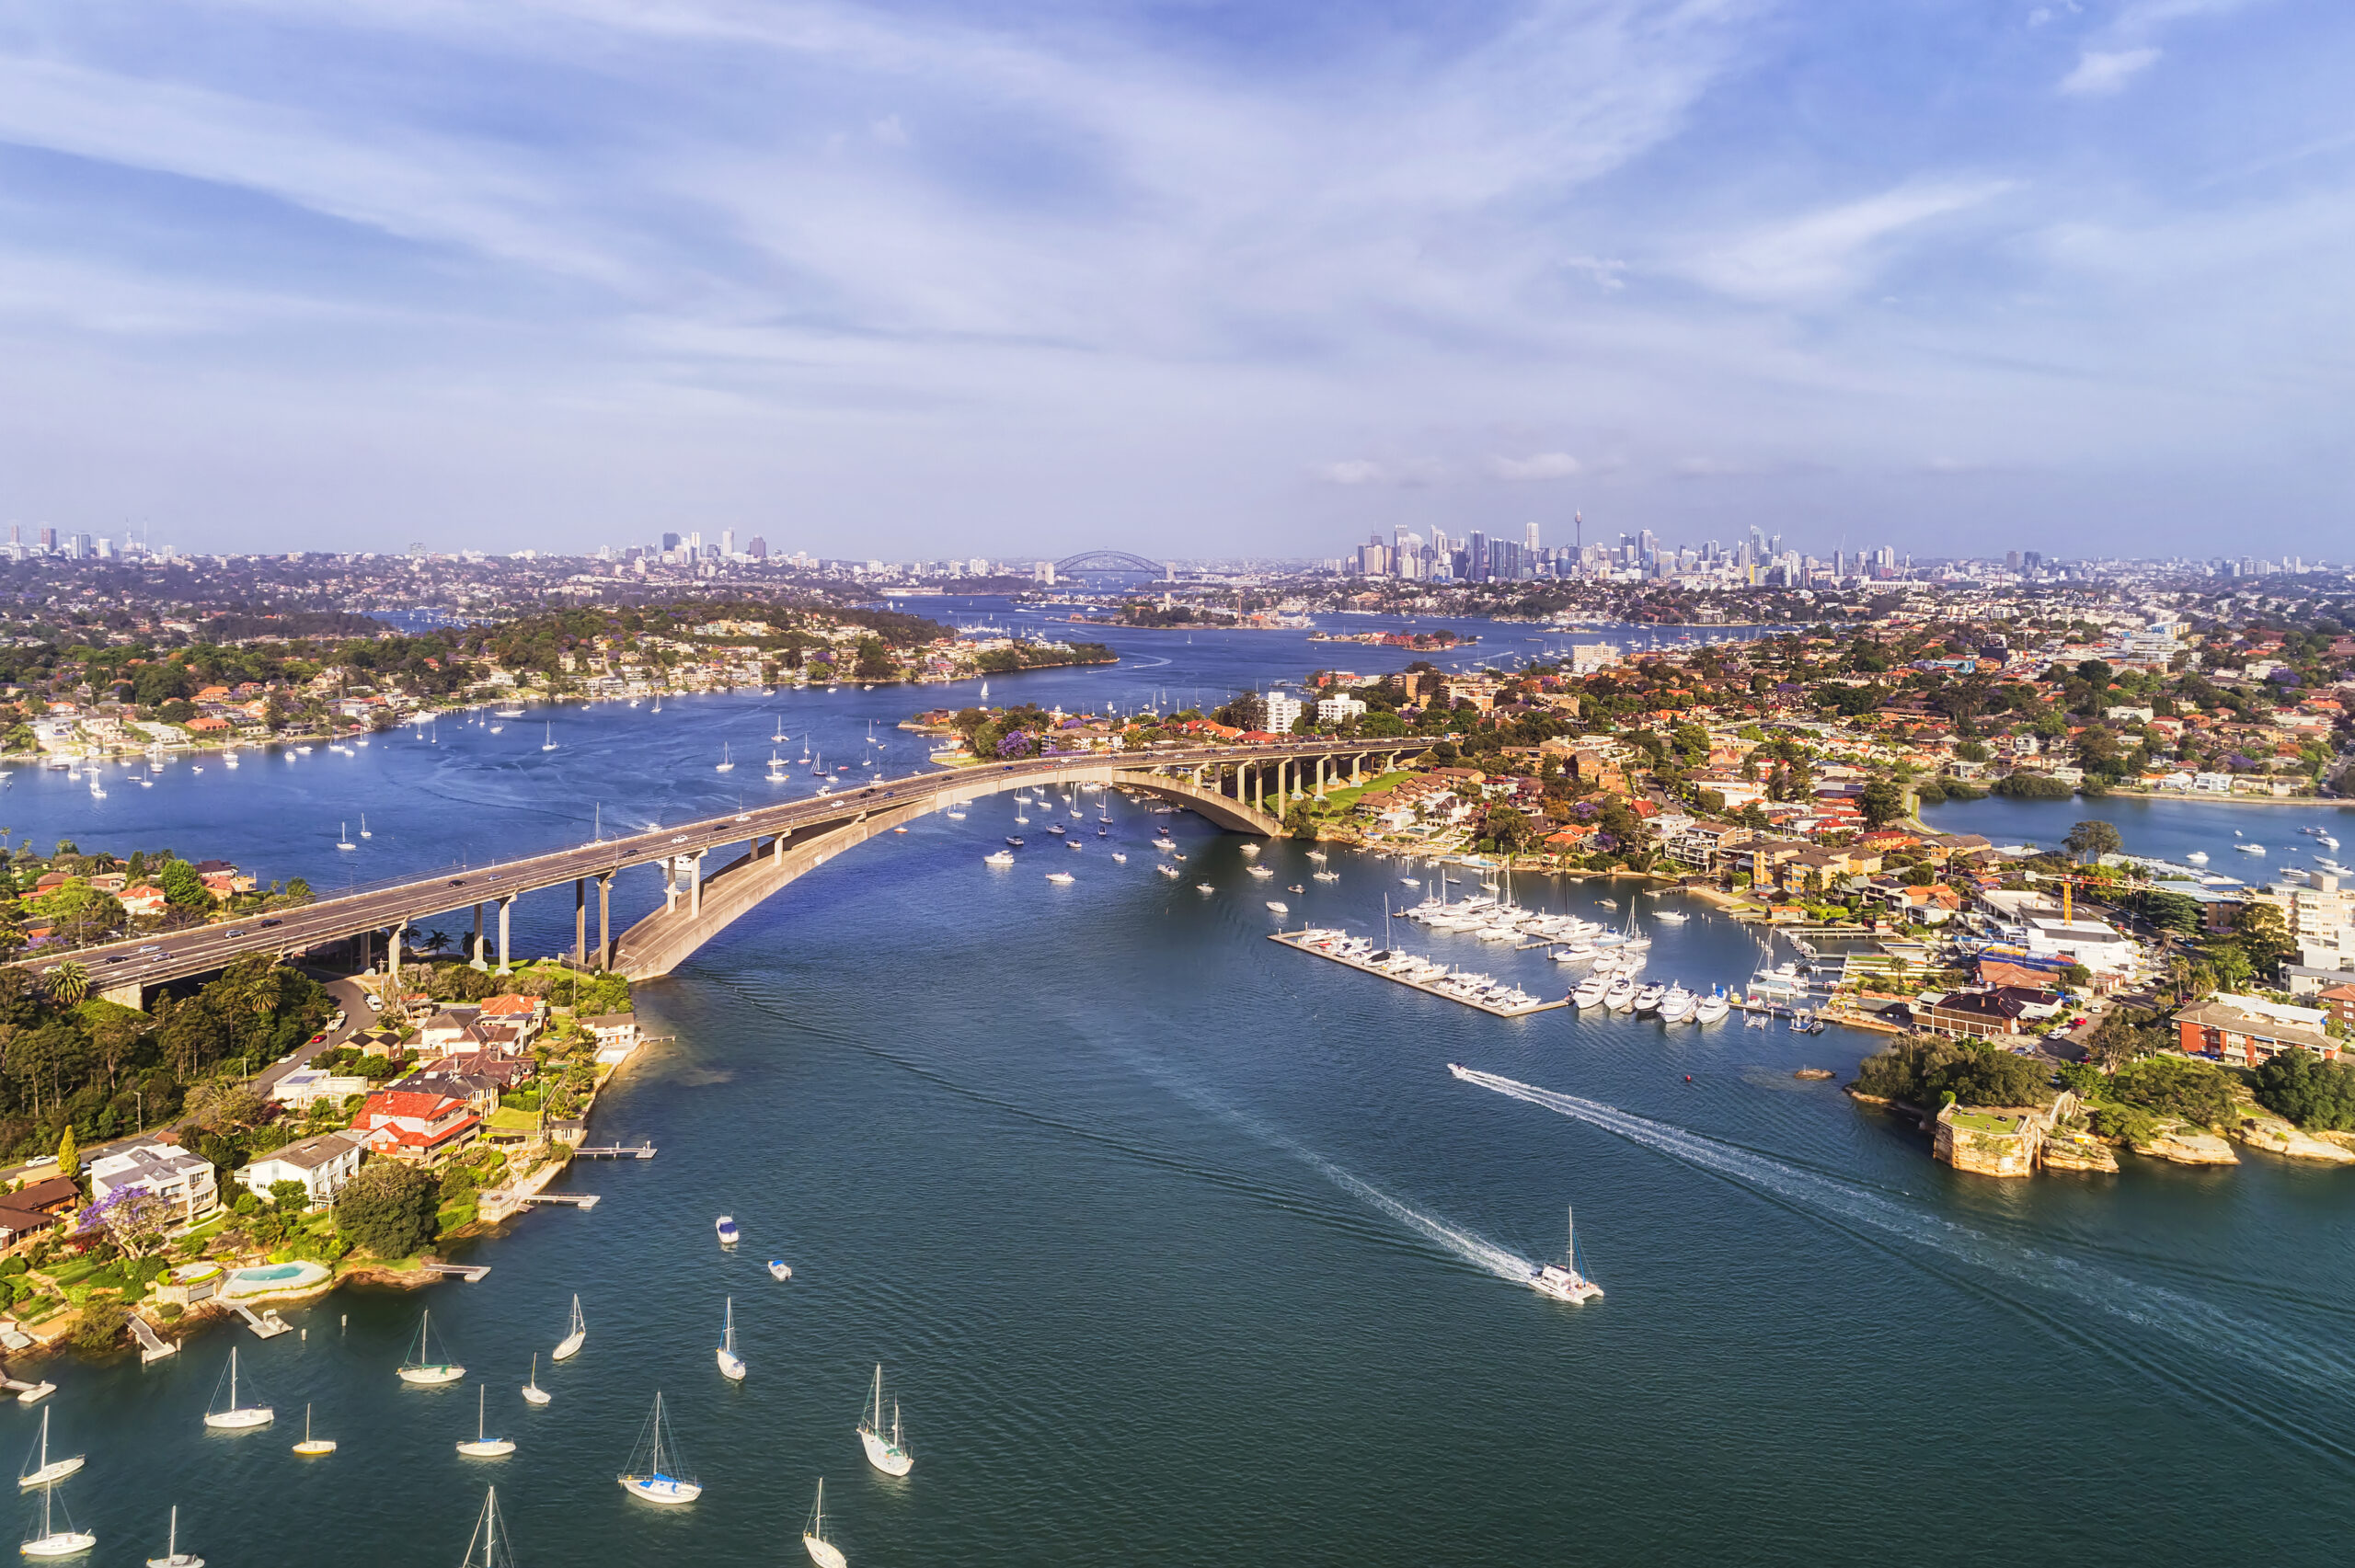 Gladesville bridge across Parramatta river in Sydney`s Inner West with distant view of the city CBD on the horizon.